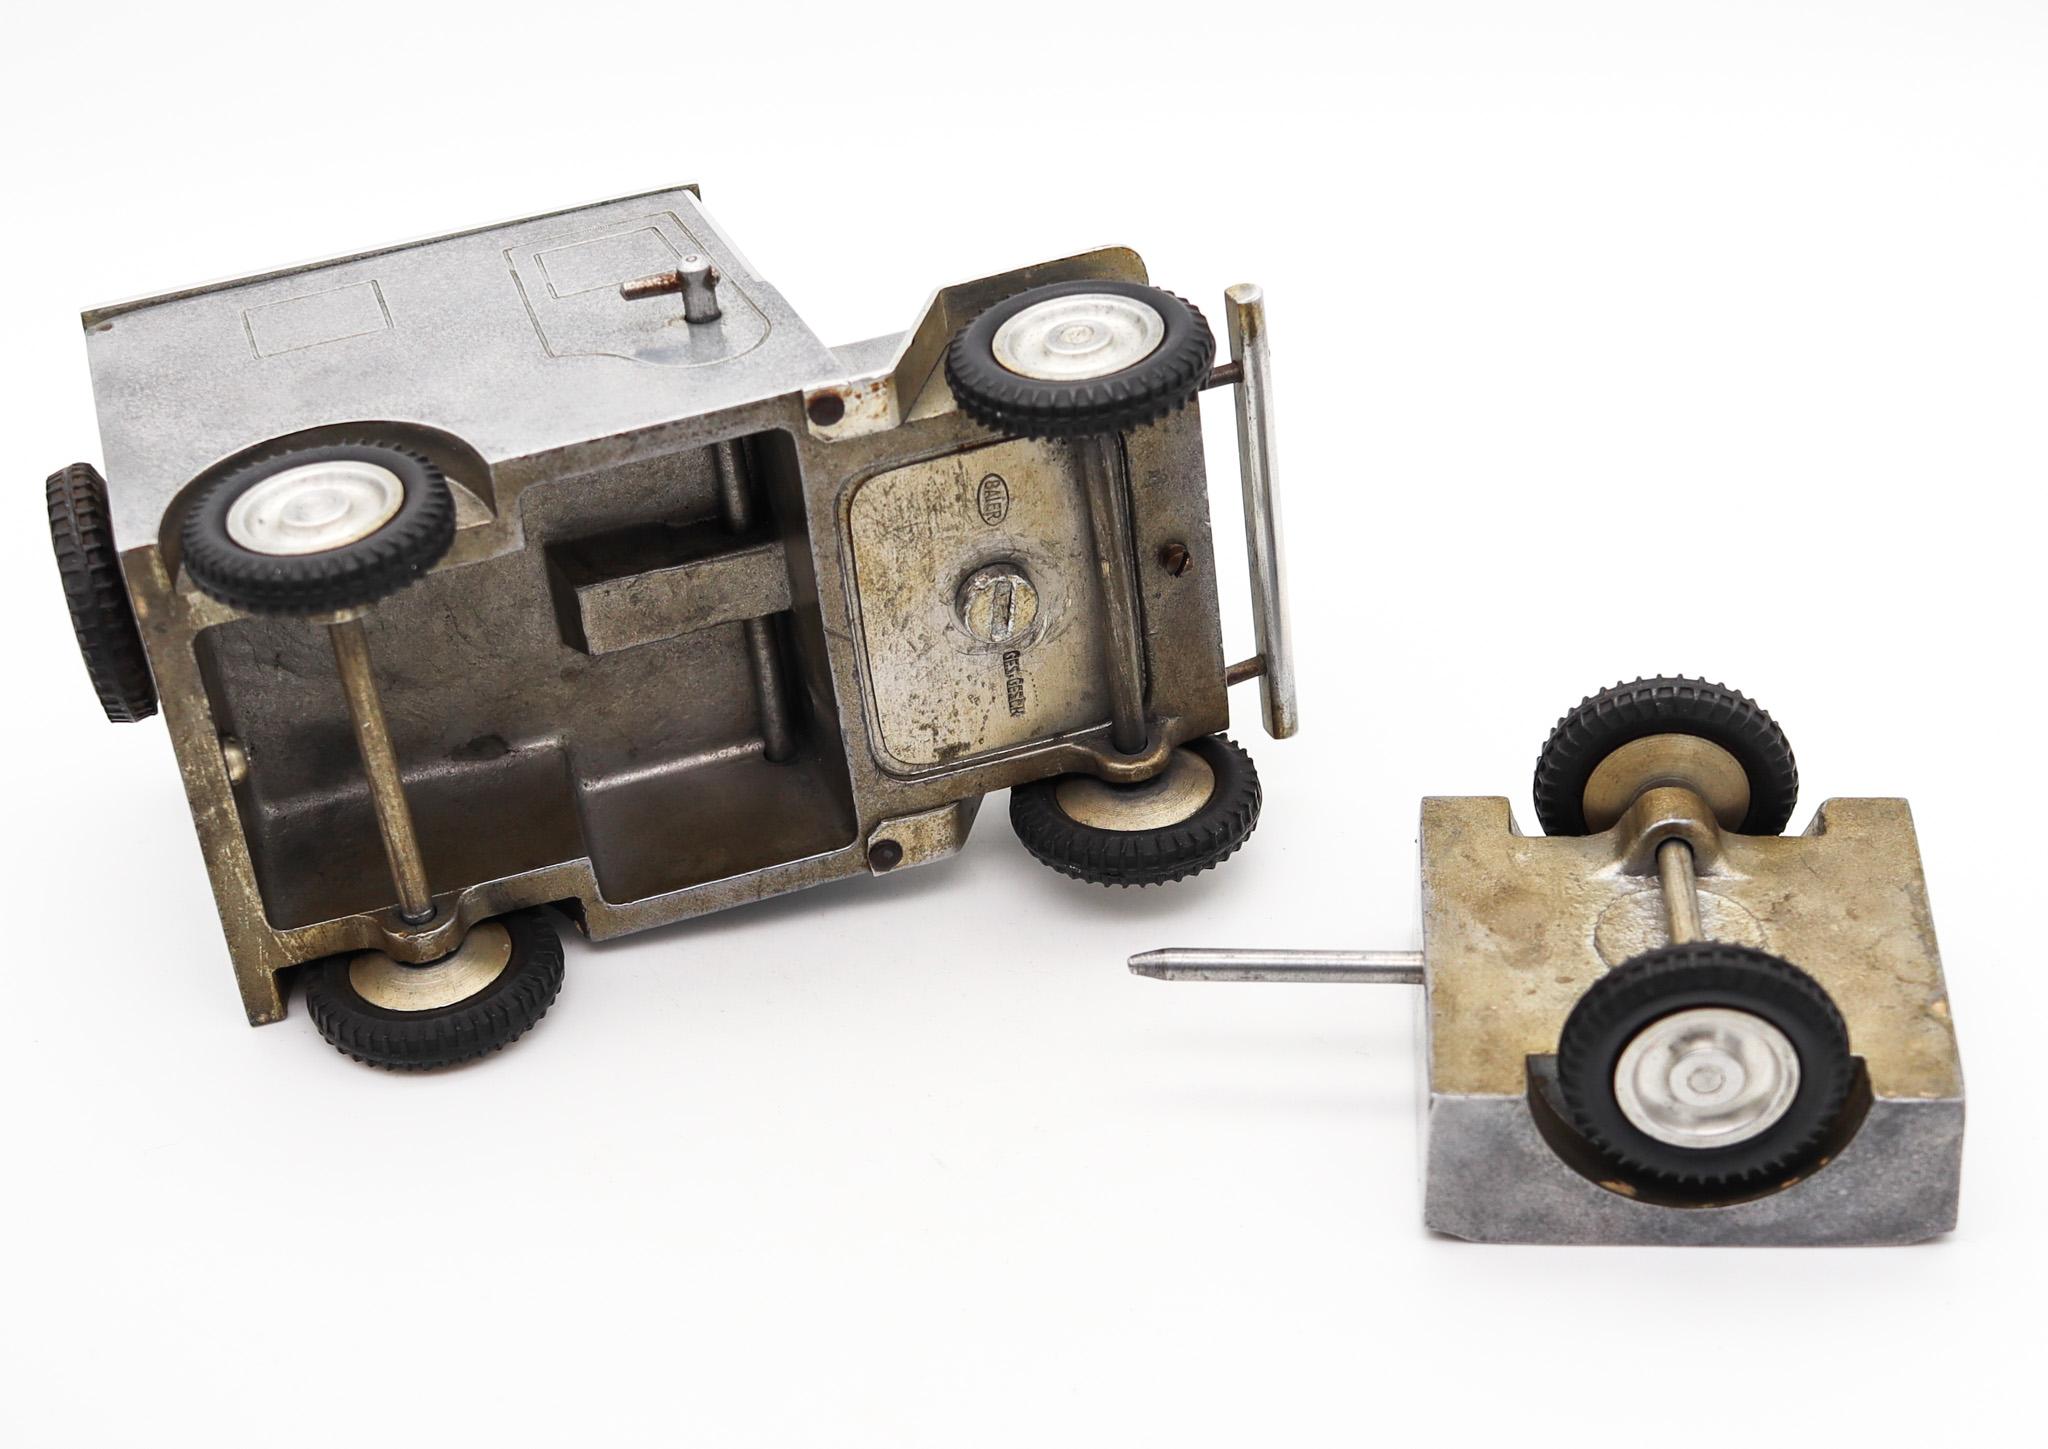 Baier German 1947 Army Truck Lighter Cigarette Holder And Ashtray In Aluminum In Excellent Condition For Sale In Miami, FL